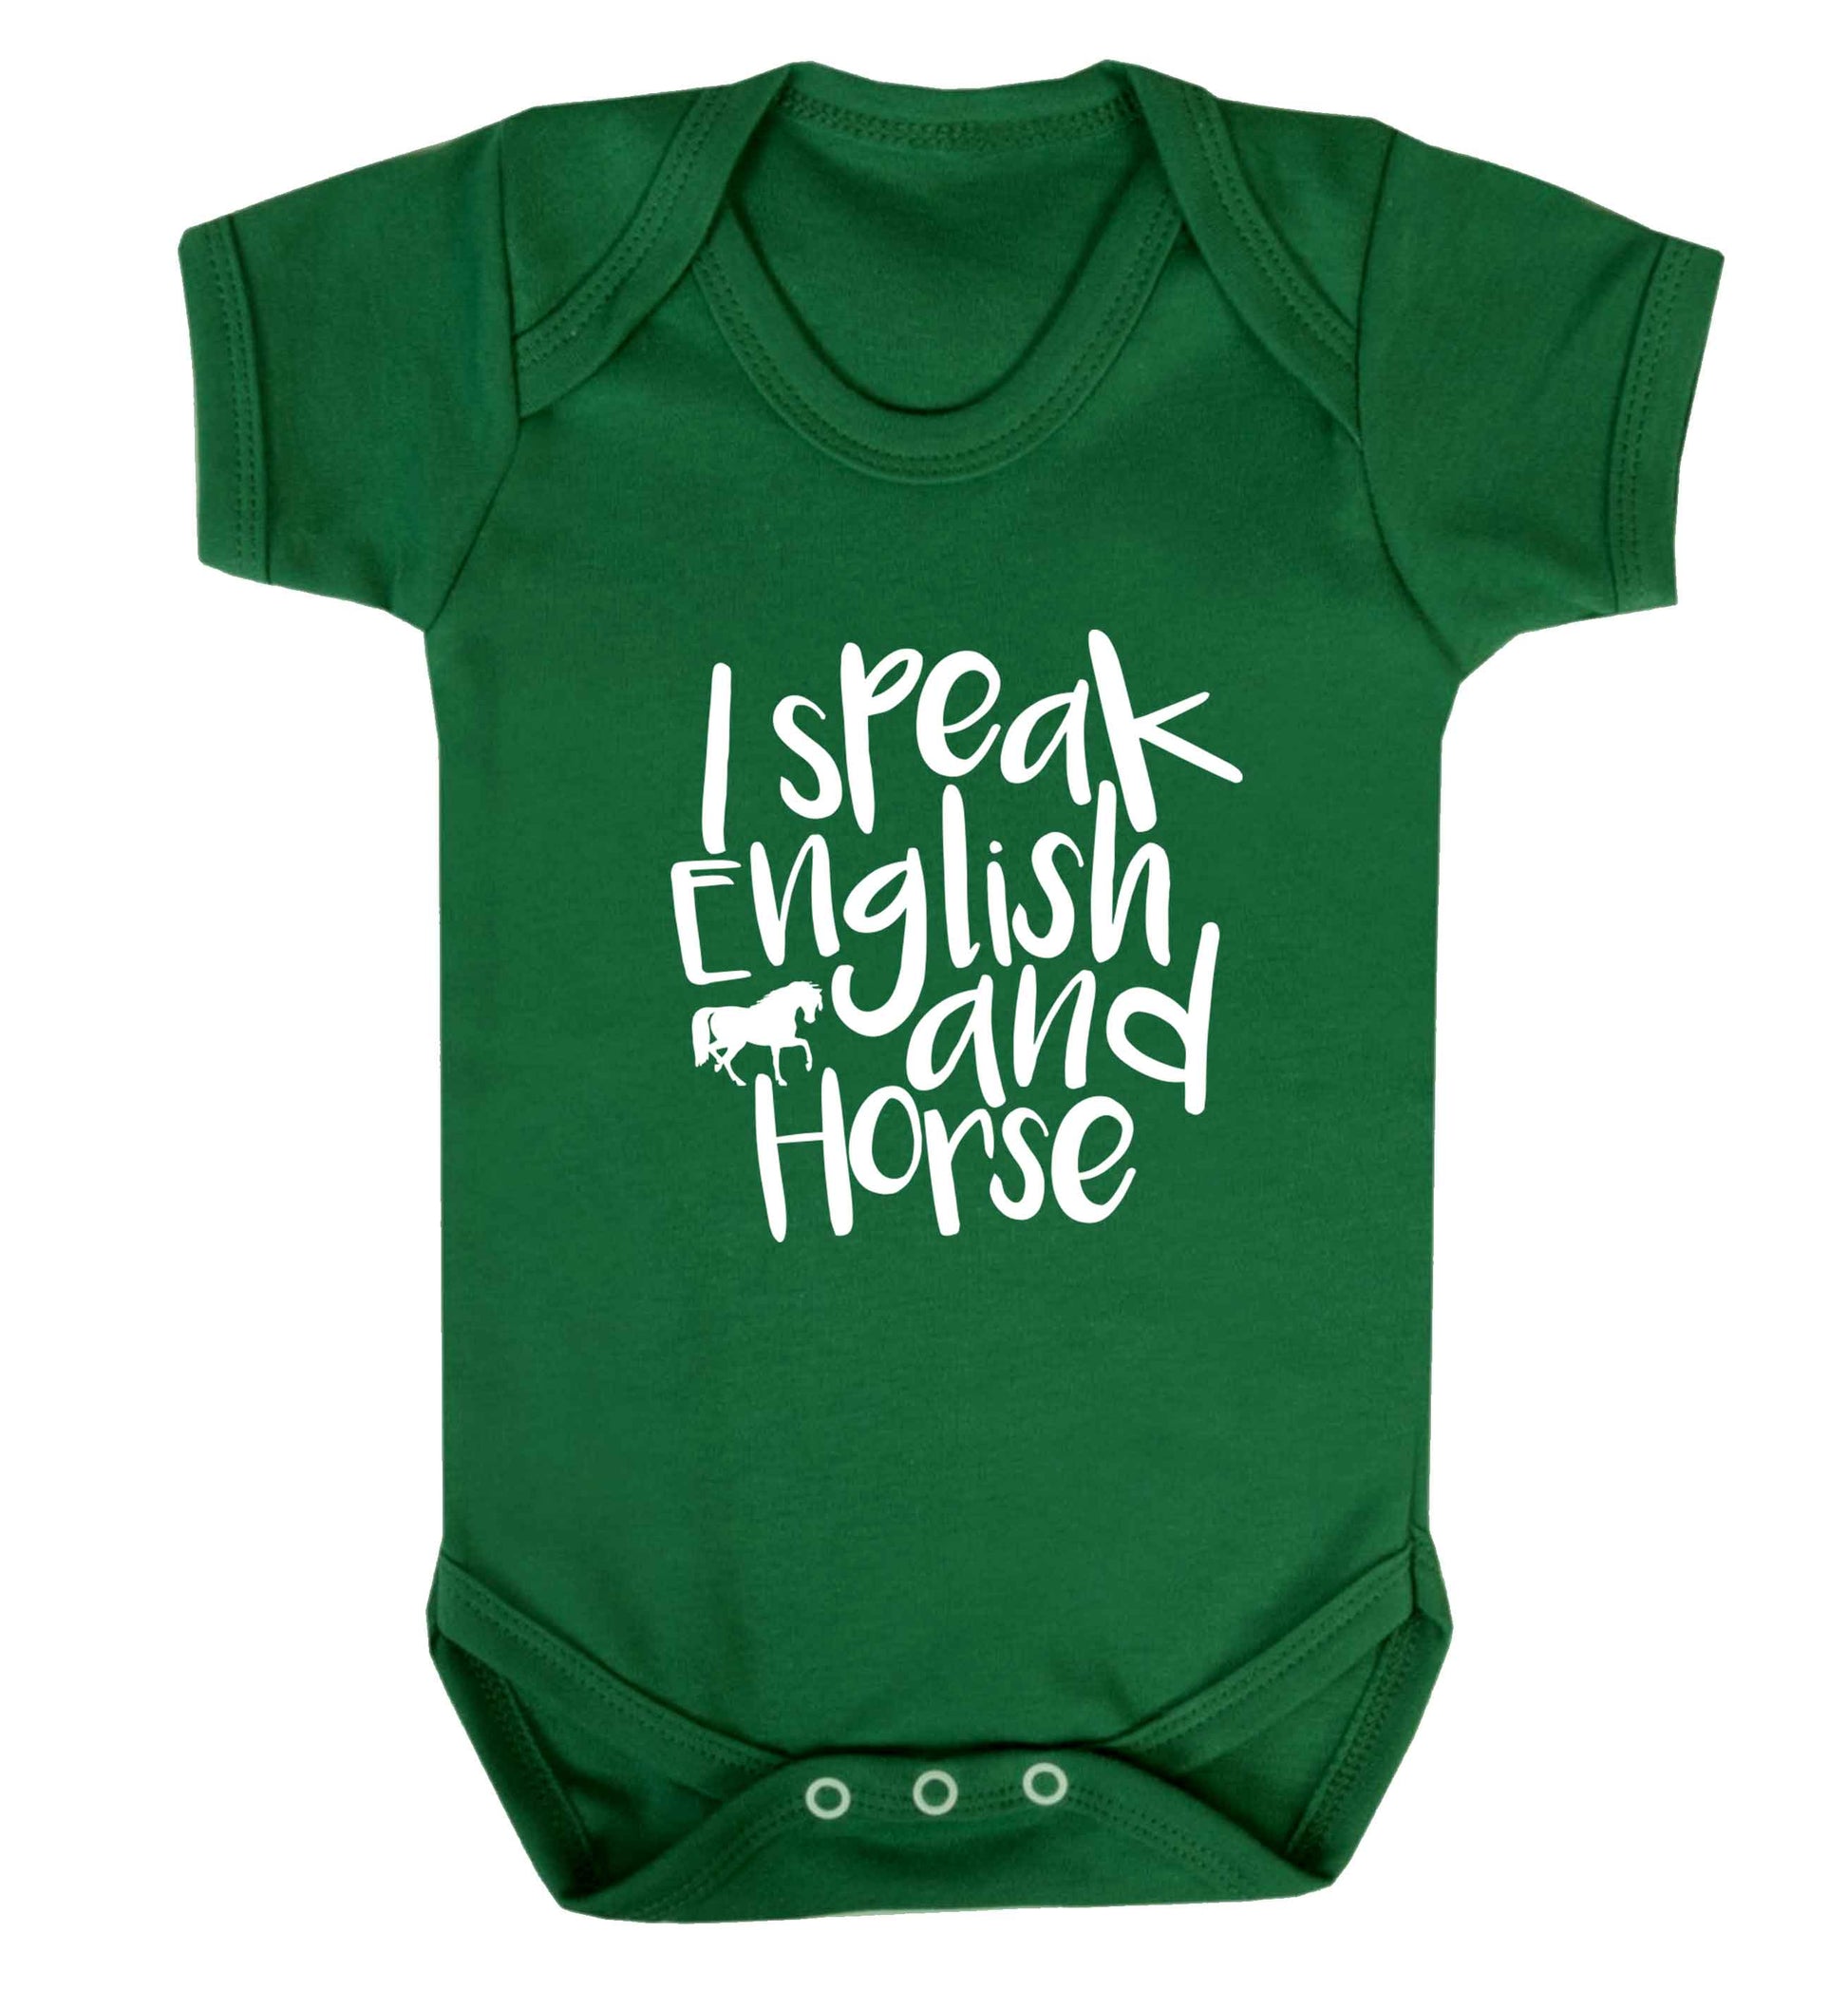 I speak English and horse baby vest green 18-24 months